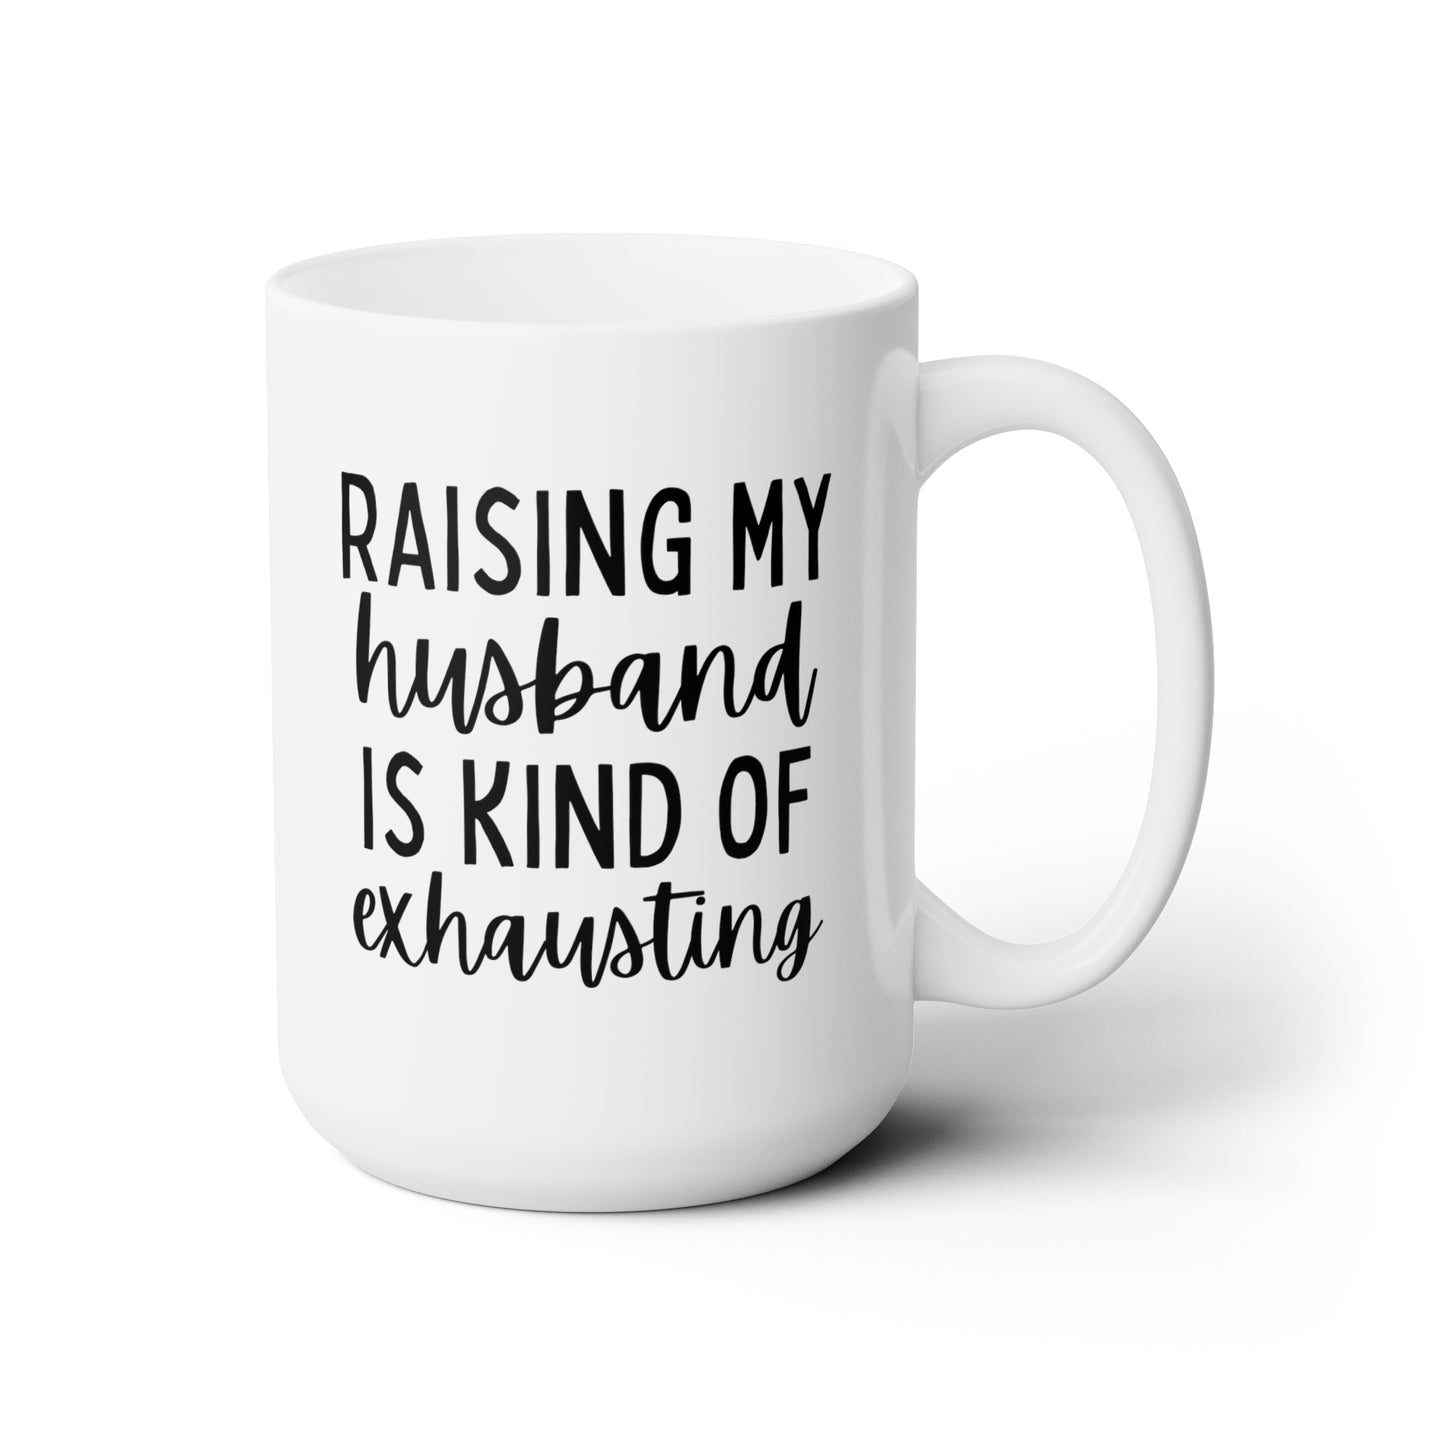 Raising My Husband is Kind of Exhausting 15oz white funny large coffee mug gift for wife mom bestie best friend sarcastic quote waveywares wavey wares wavywares wavy wares